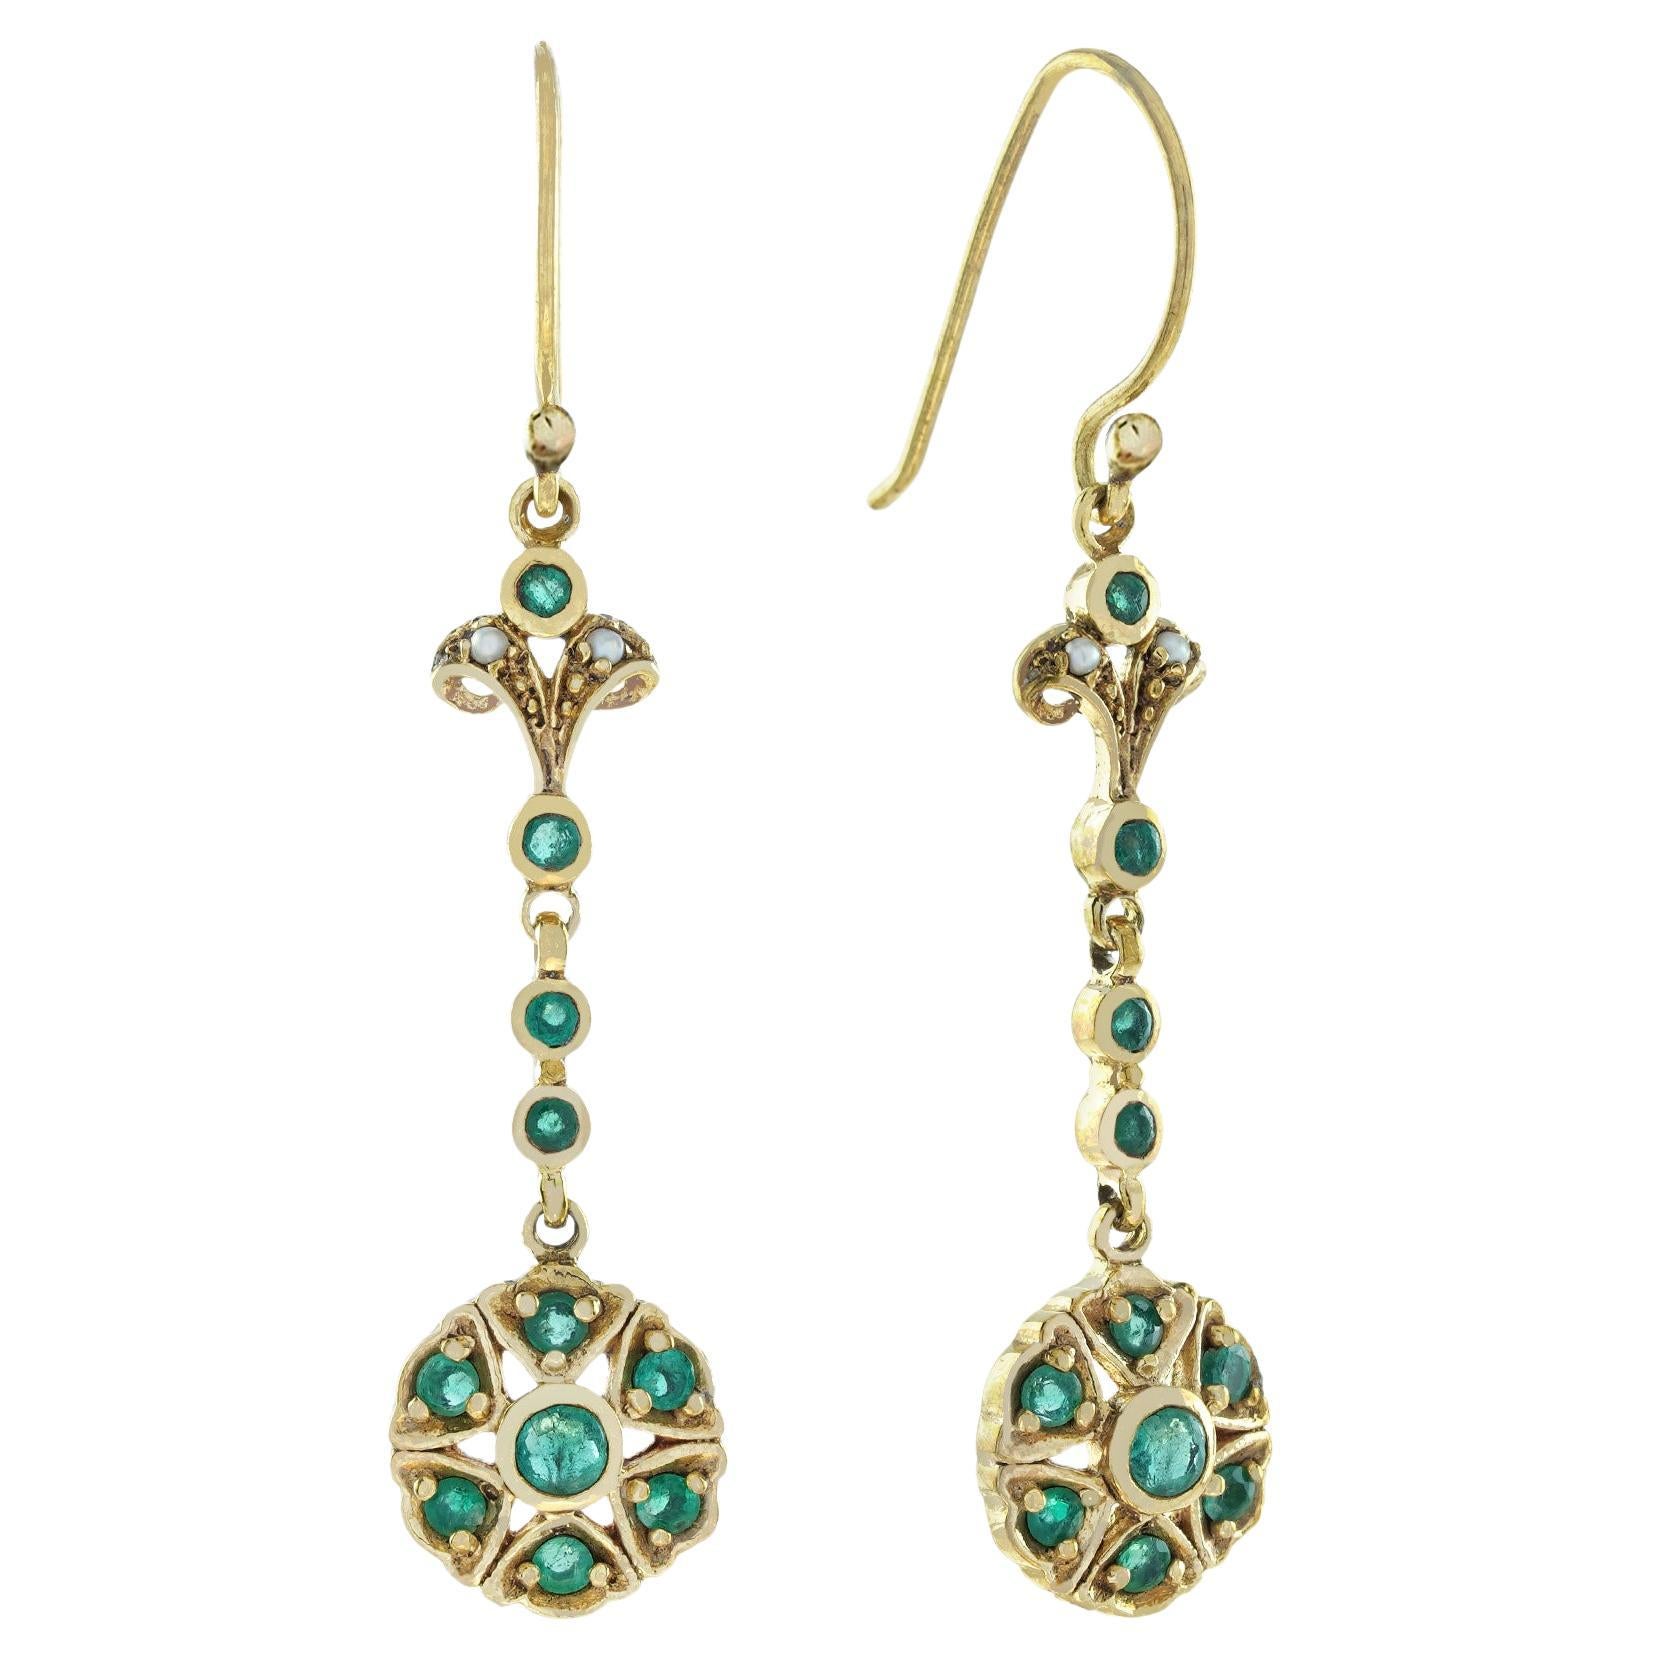 Natural Emerald and Pearl Vintage Style Dangle Earrings in 9K Yellow Gold